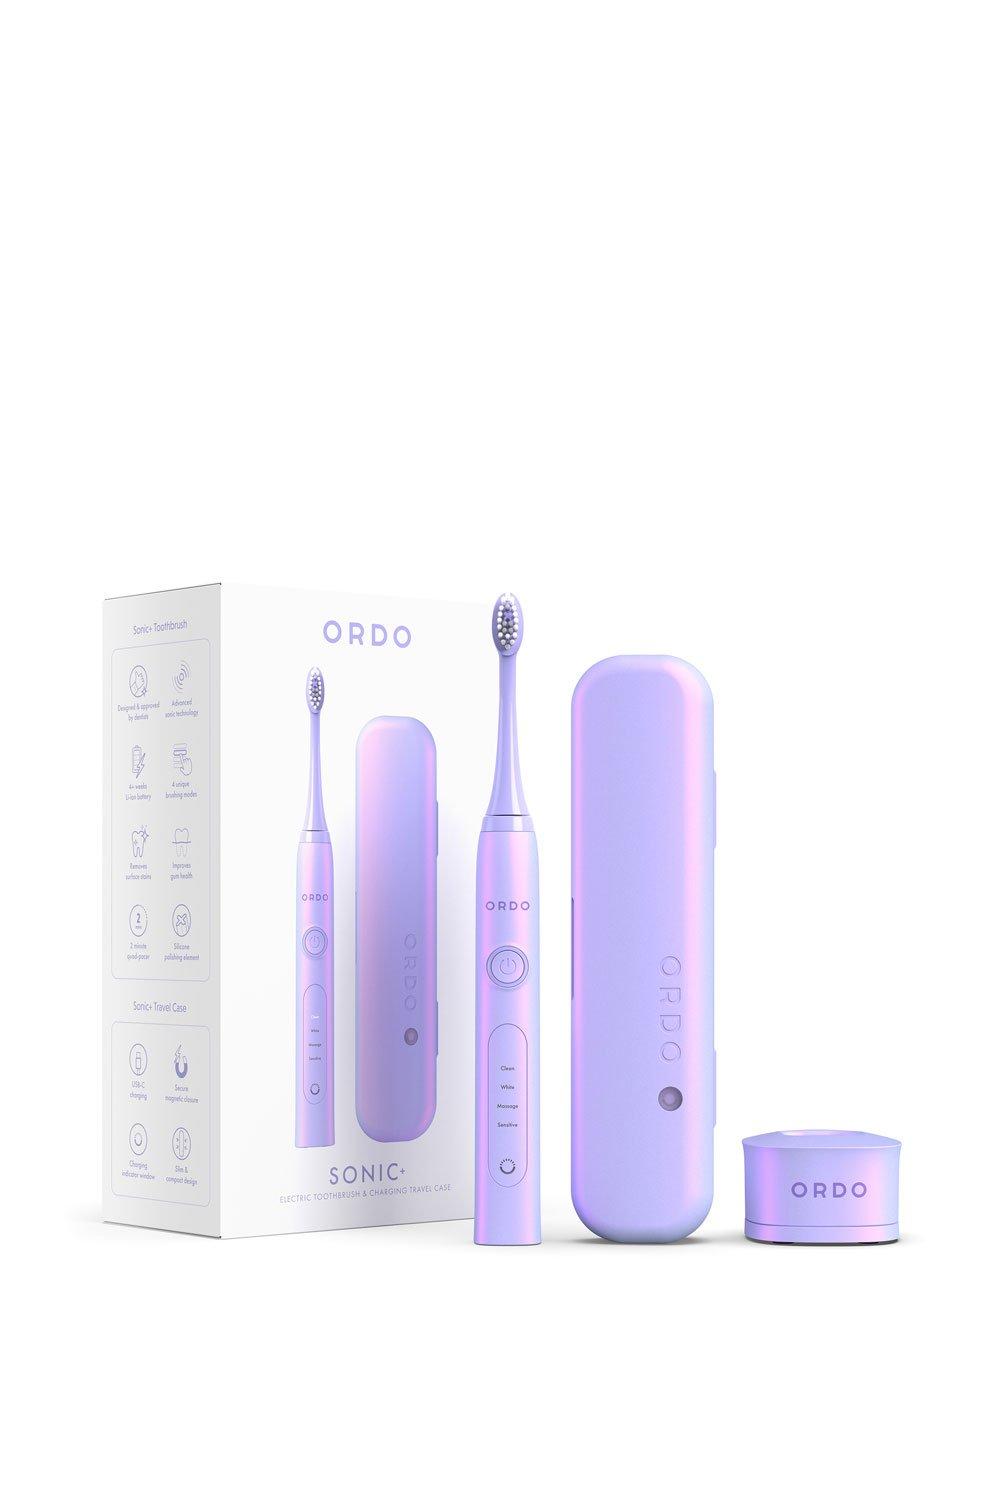 Ordo Sonic+ Electric Toothbrush and Travel Case Violet